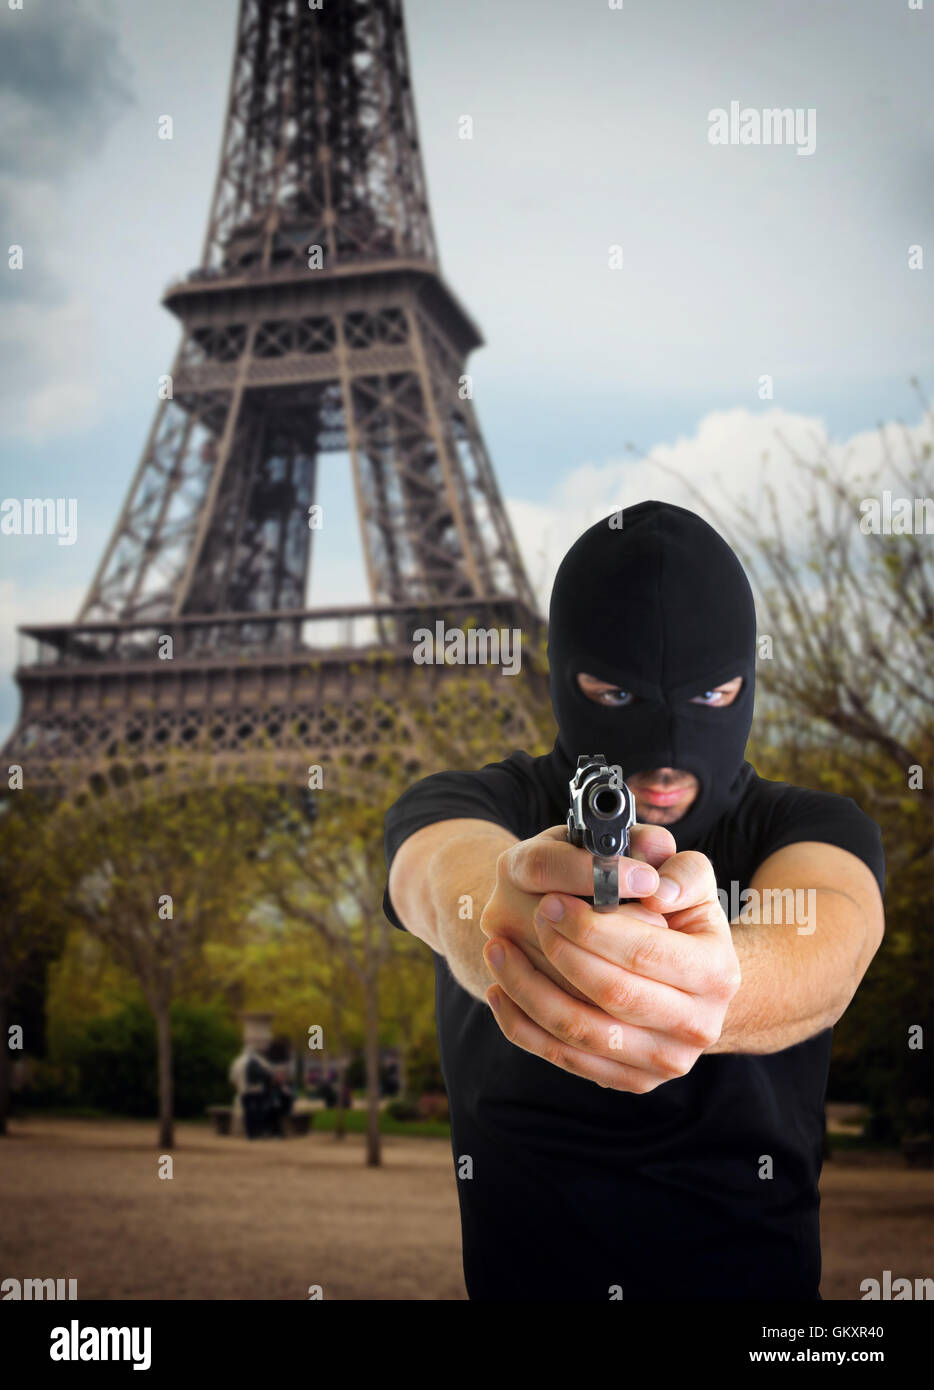 Terrorist with face covered in Paris near the Eiffel Tower Stock Photo